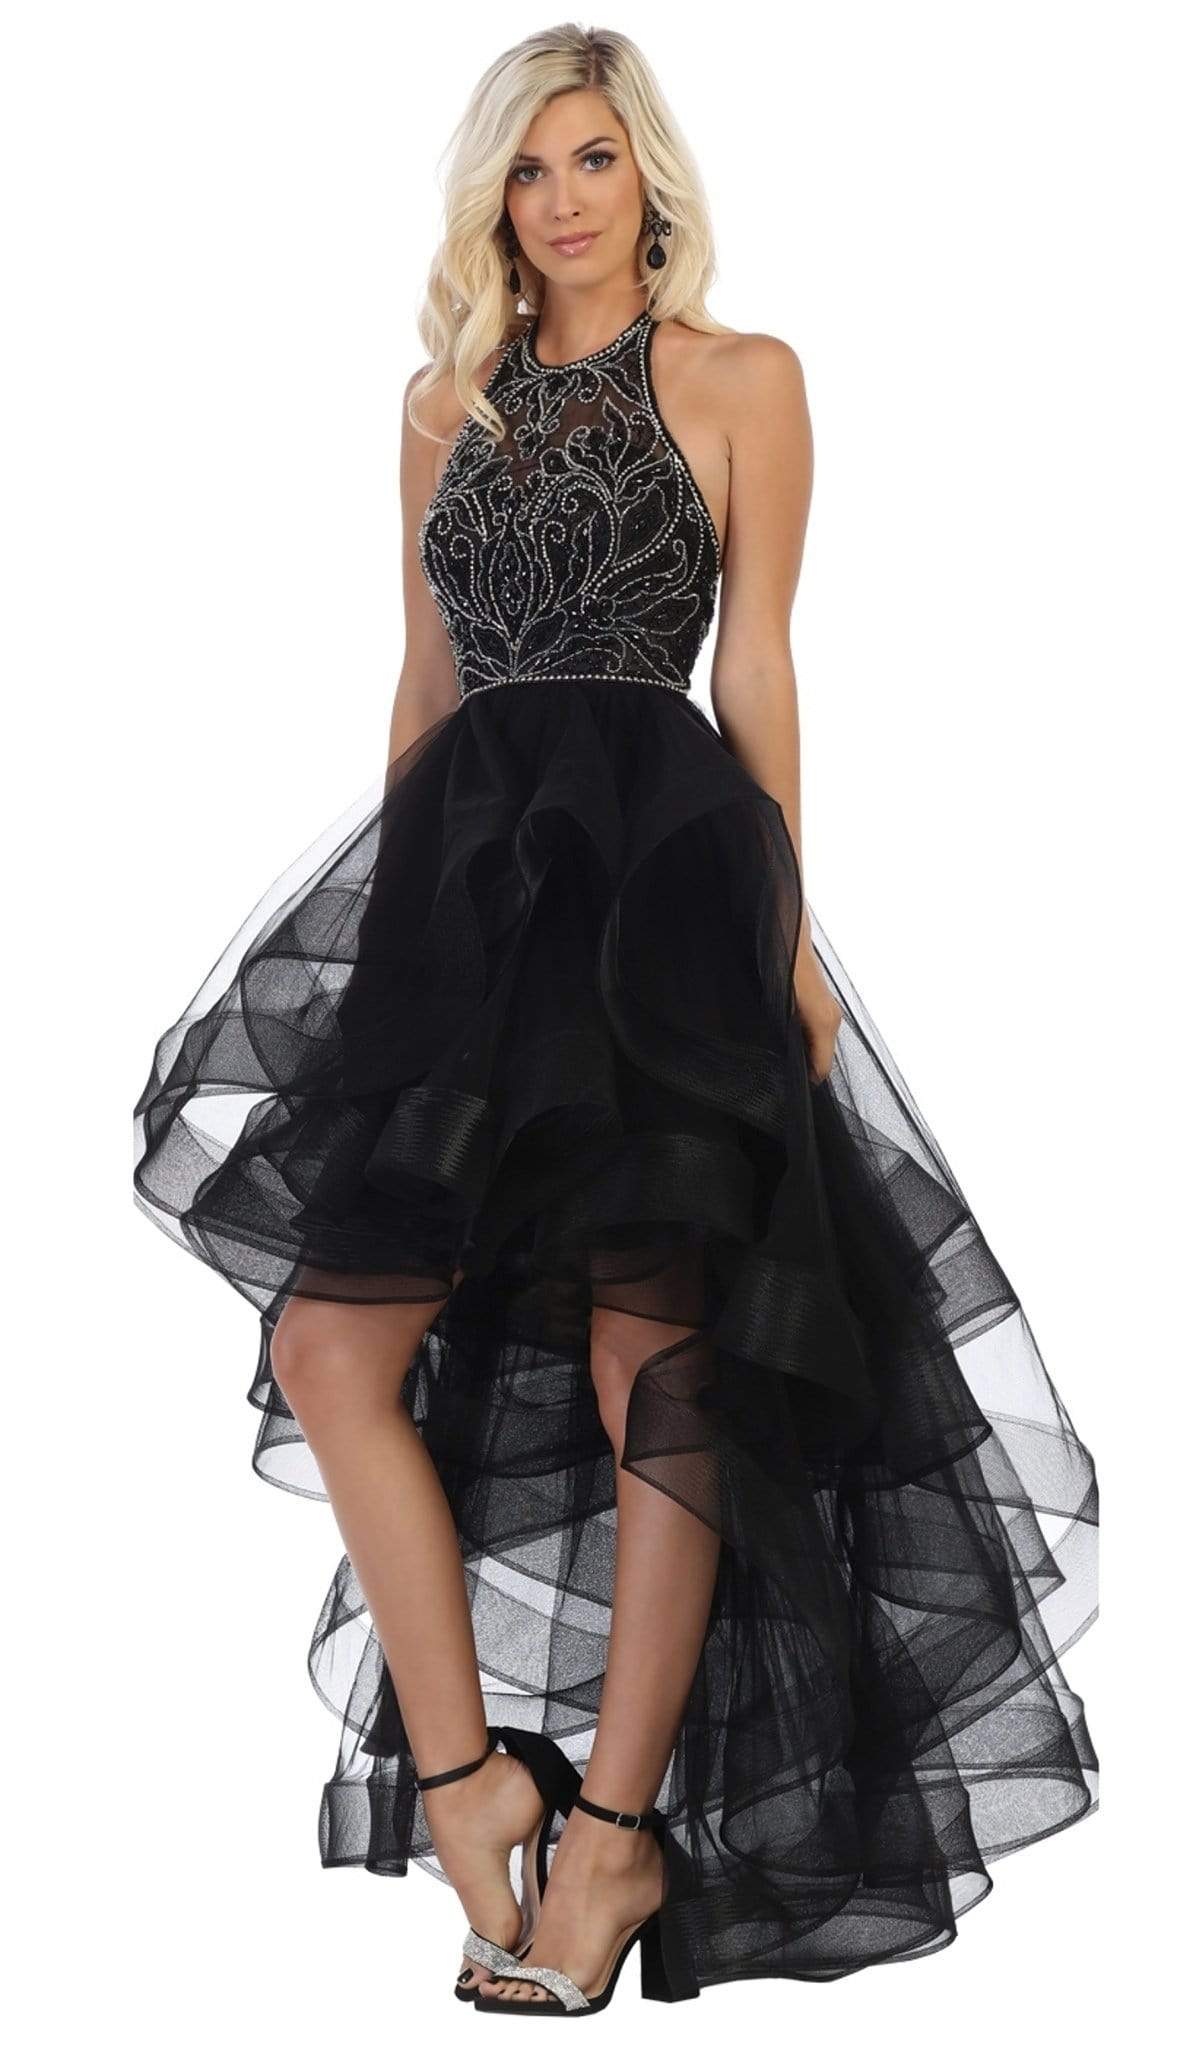 May Queen - RQ7717 Jeweled Illusion Halter High Low Gown Special Occasion Dress 2 / Black